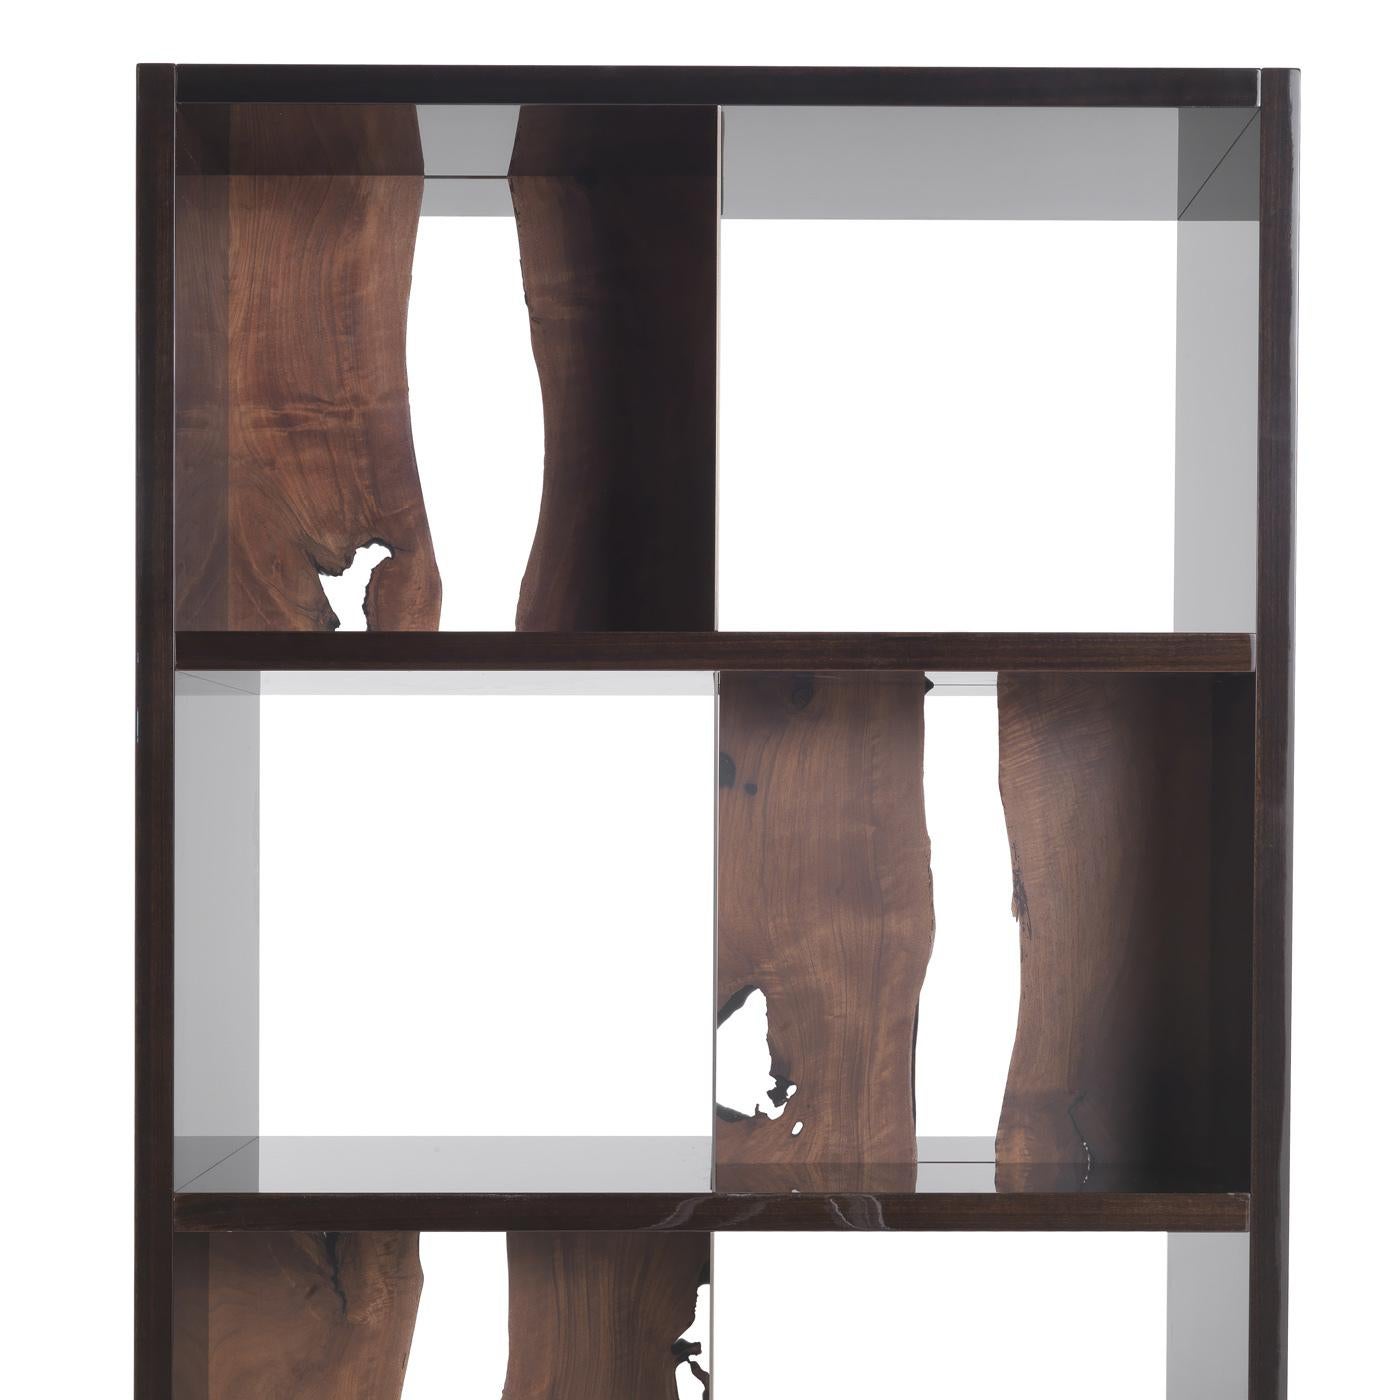 A striking piece of functional decor that will infuse any living room with refined sophistication, this splendid bookcase is the result of masterful craftsmanship combined with modern design. Fashioned of eucalyptus wood, it comprises four shelves